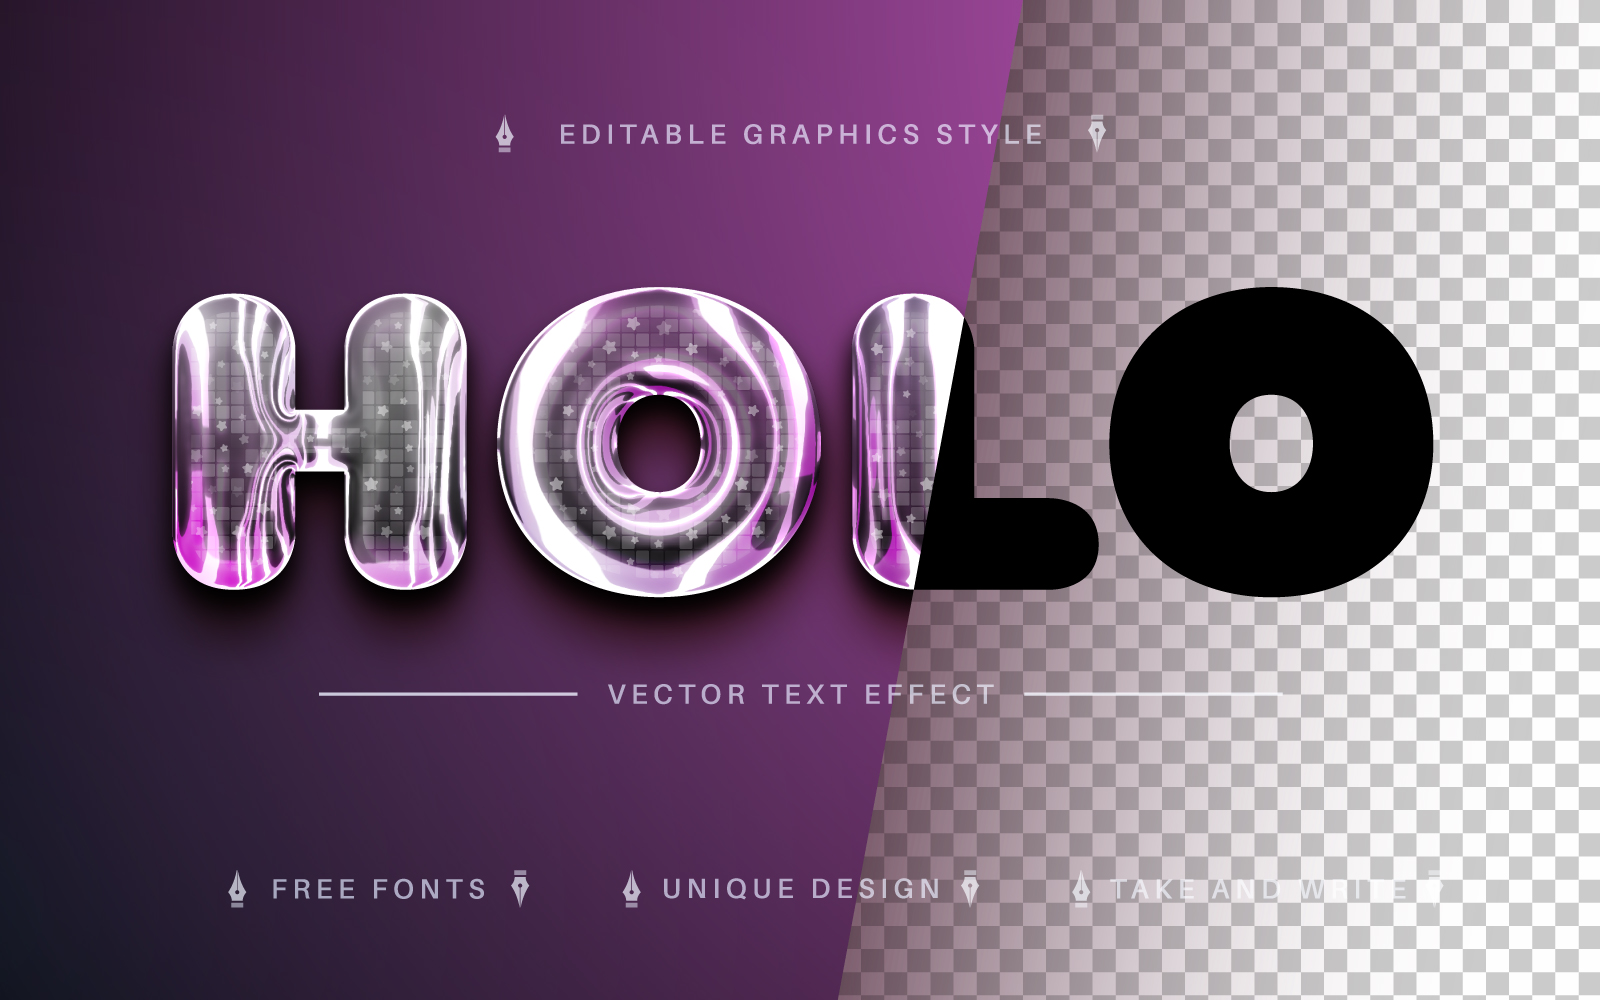 Holo - Editable Text Effect, Font Style, Graphics Illustration